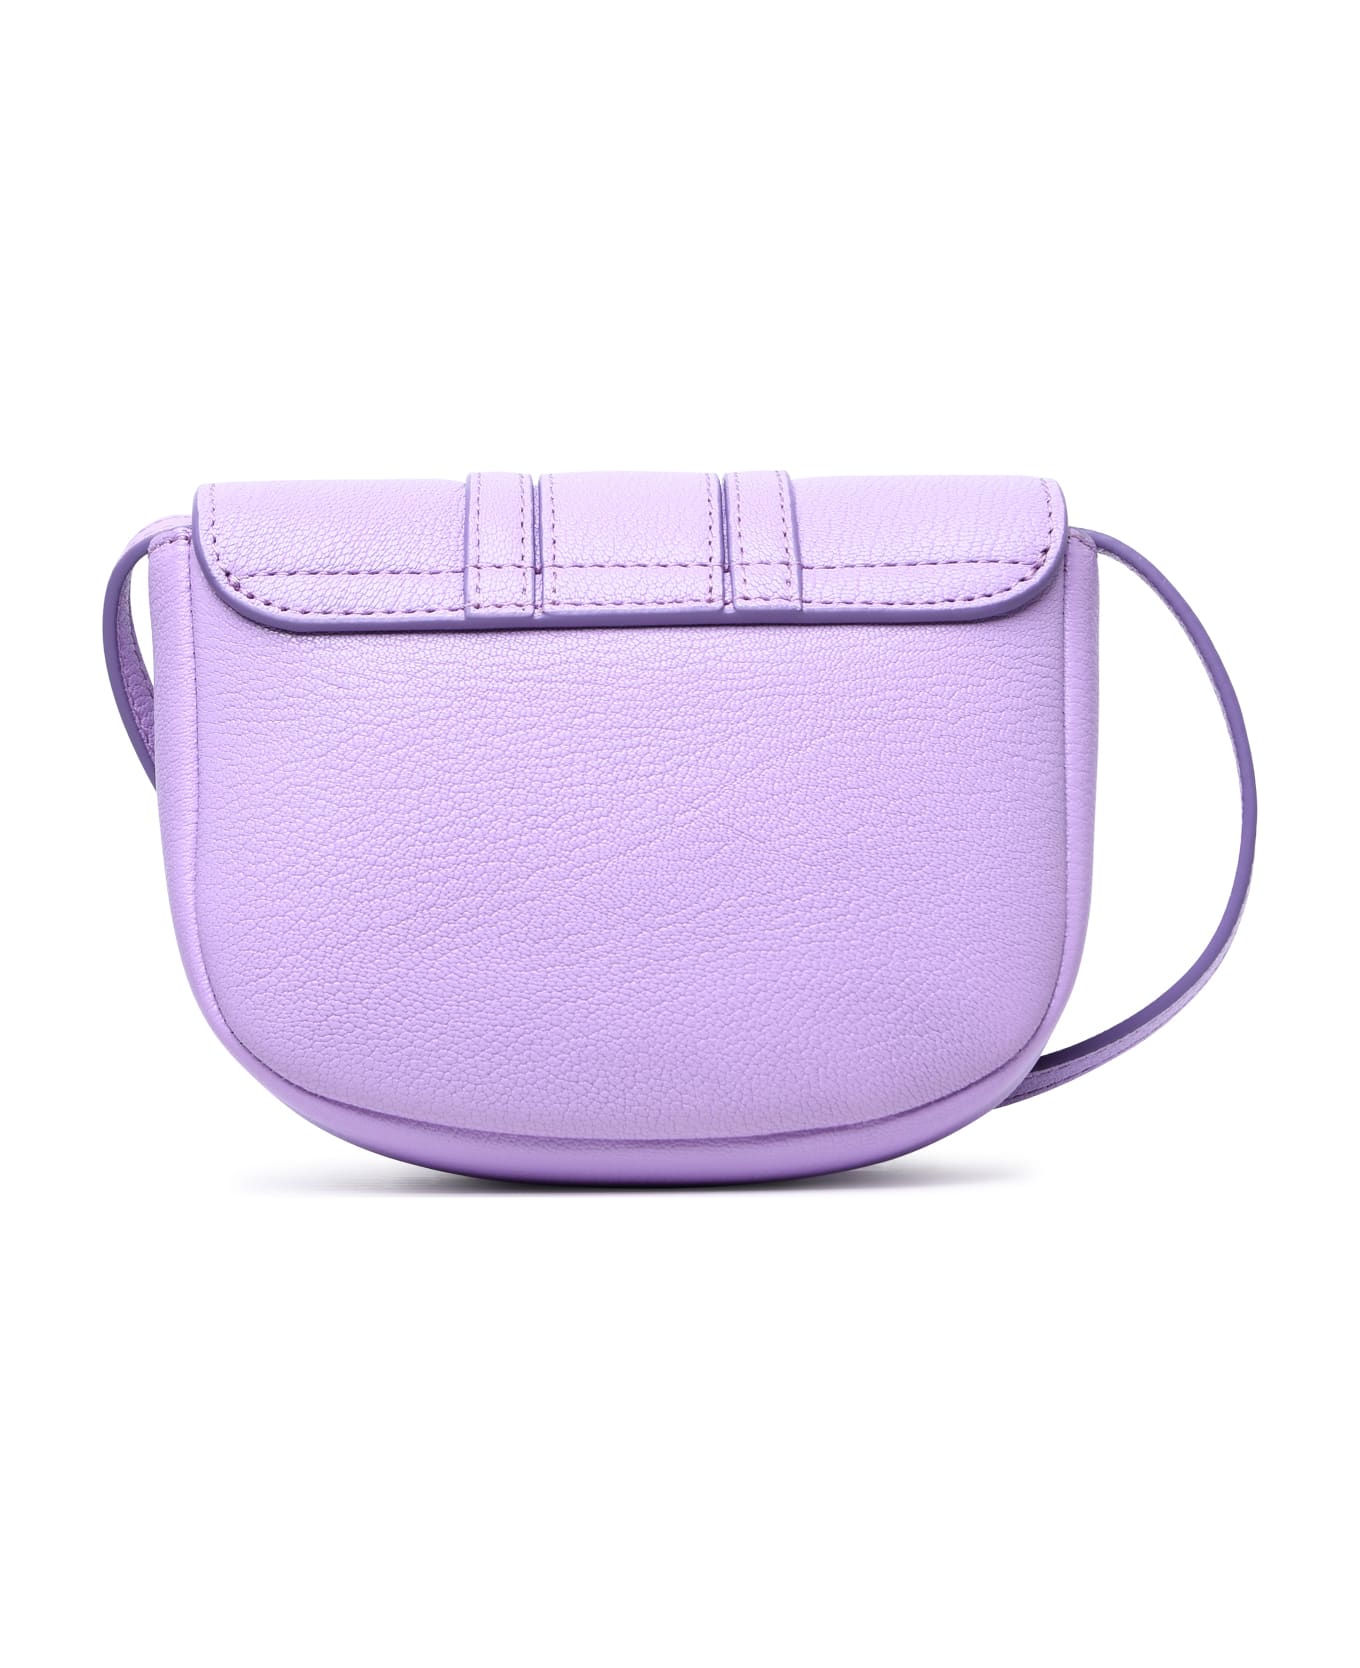 See by Chloé 'hana' Small Lilac Leather Bag - Lilla